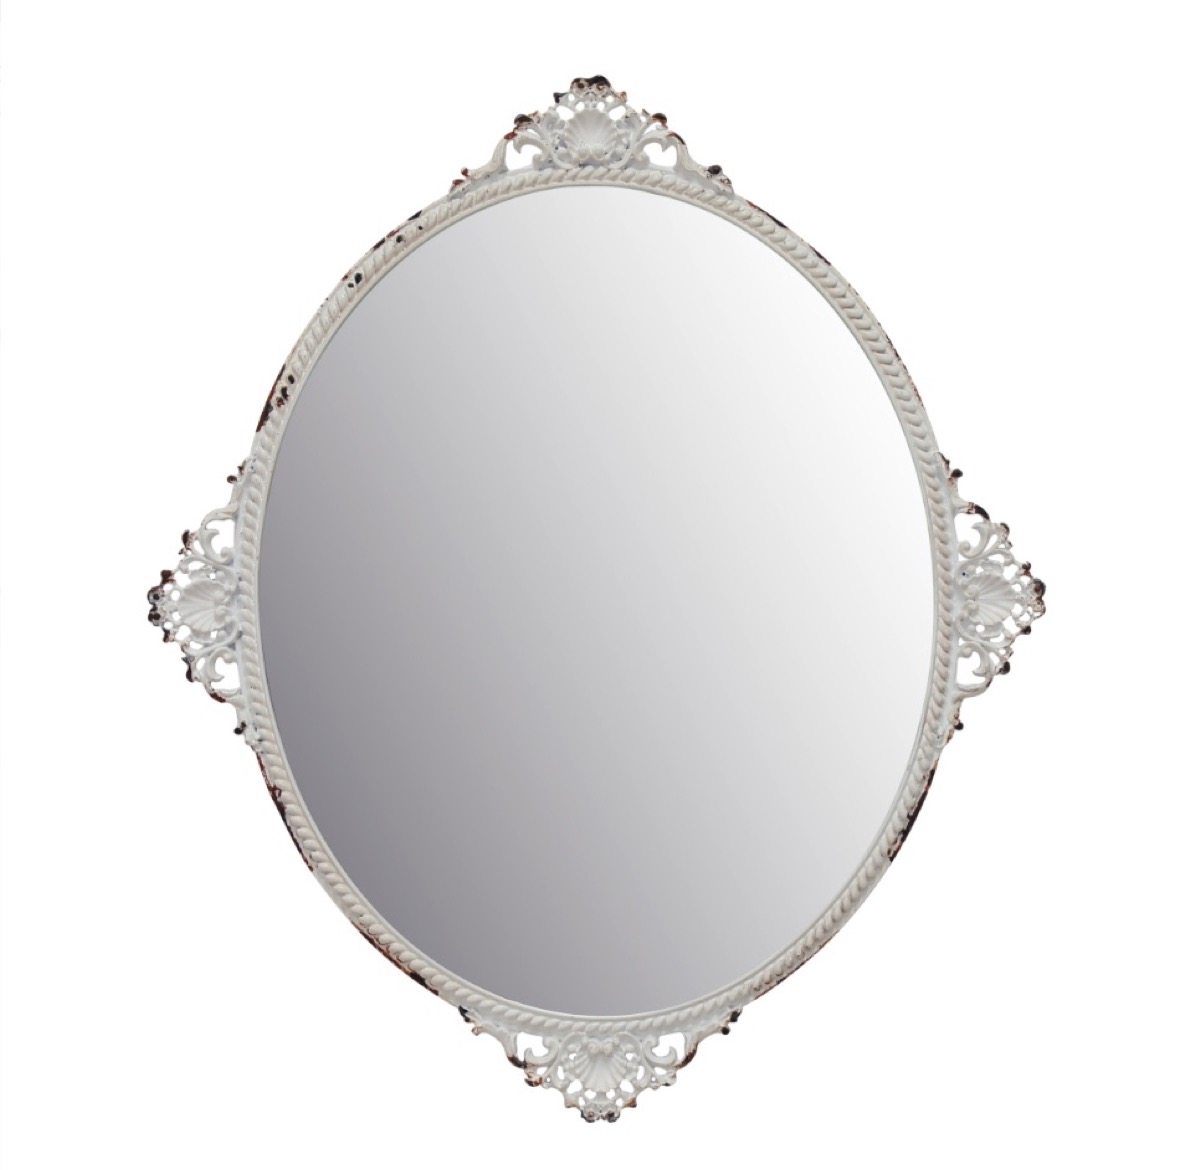 white distressed oval mirror